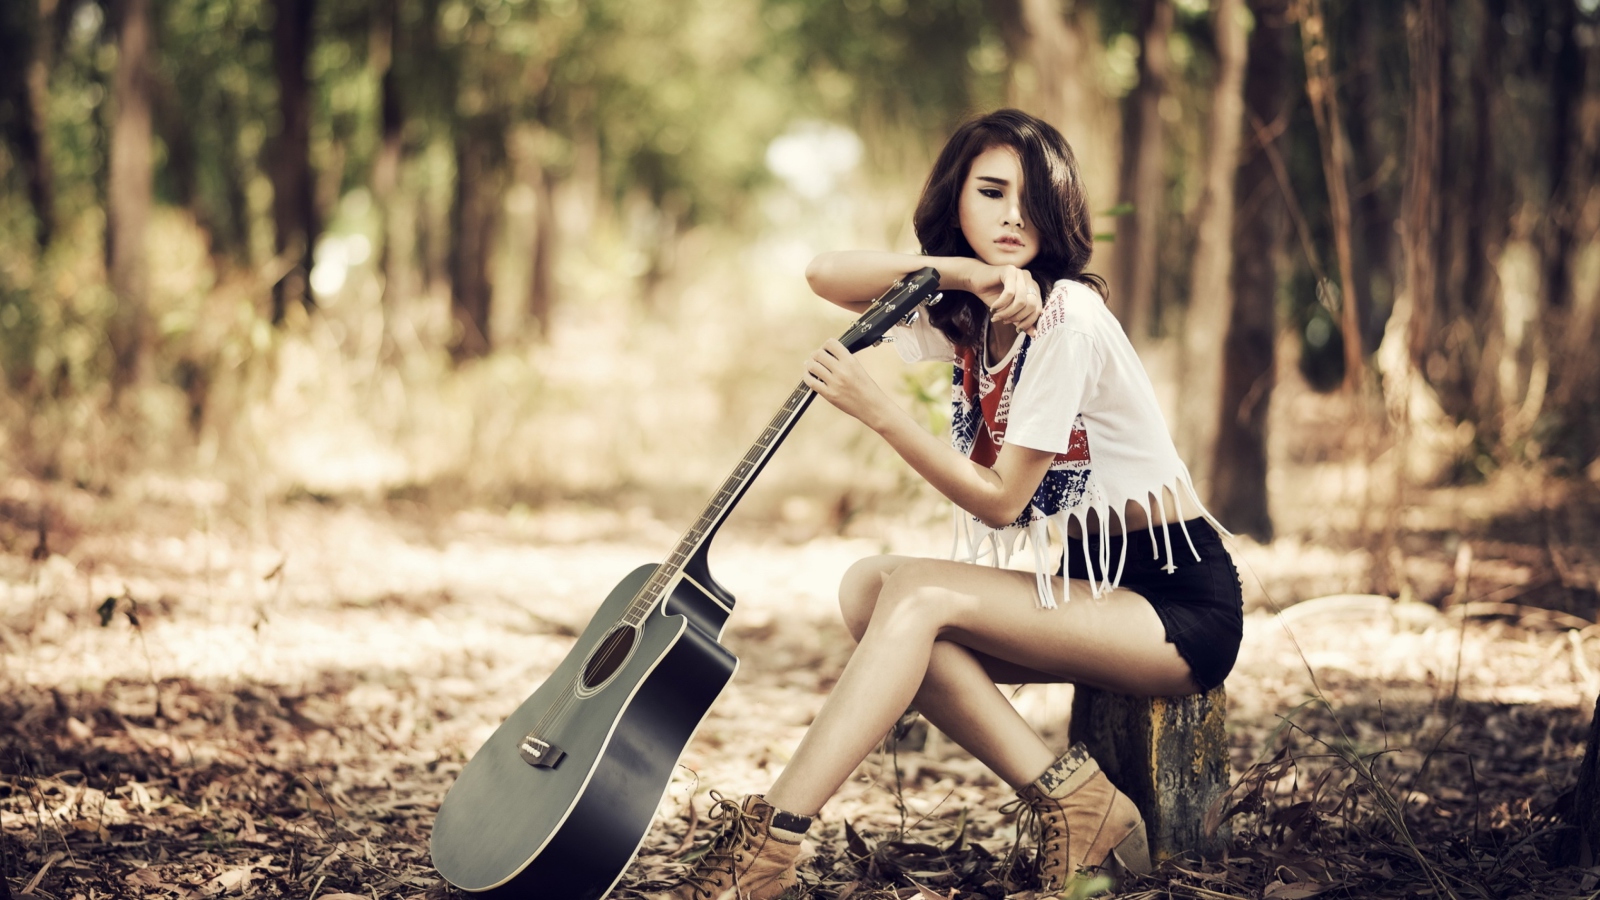 Pretty Brunette Model With Guitar At Meadow wallpaper 1600x900